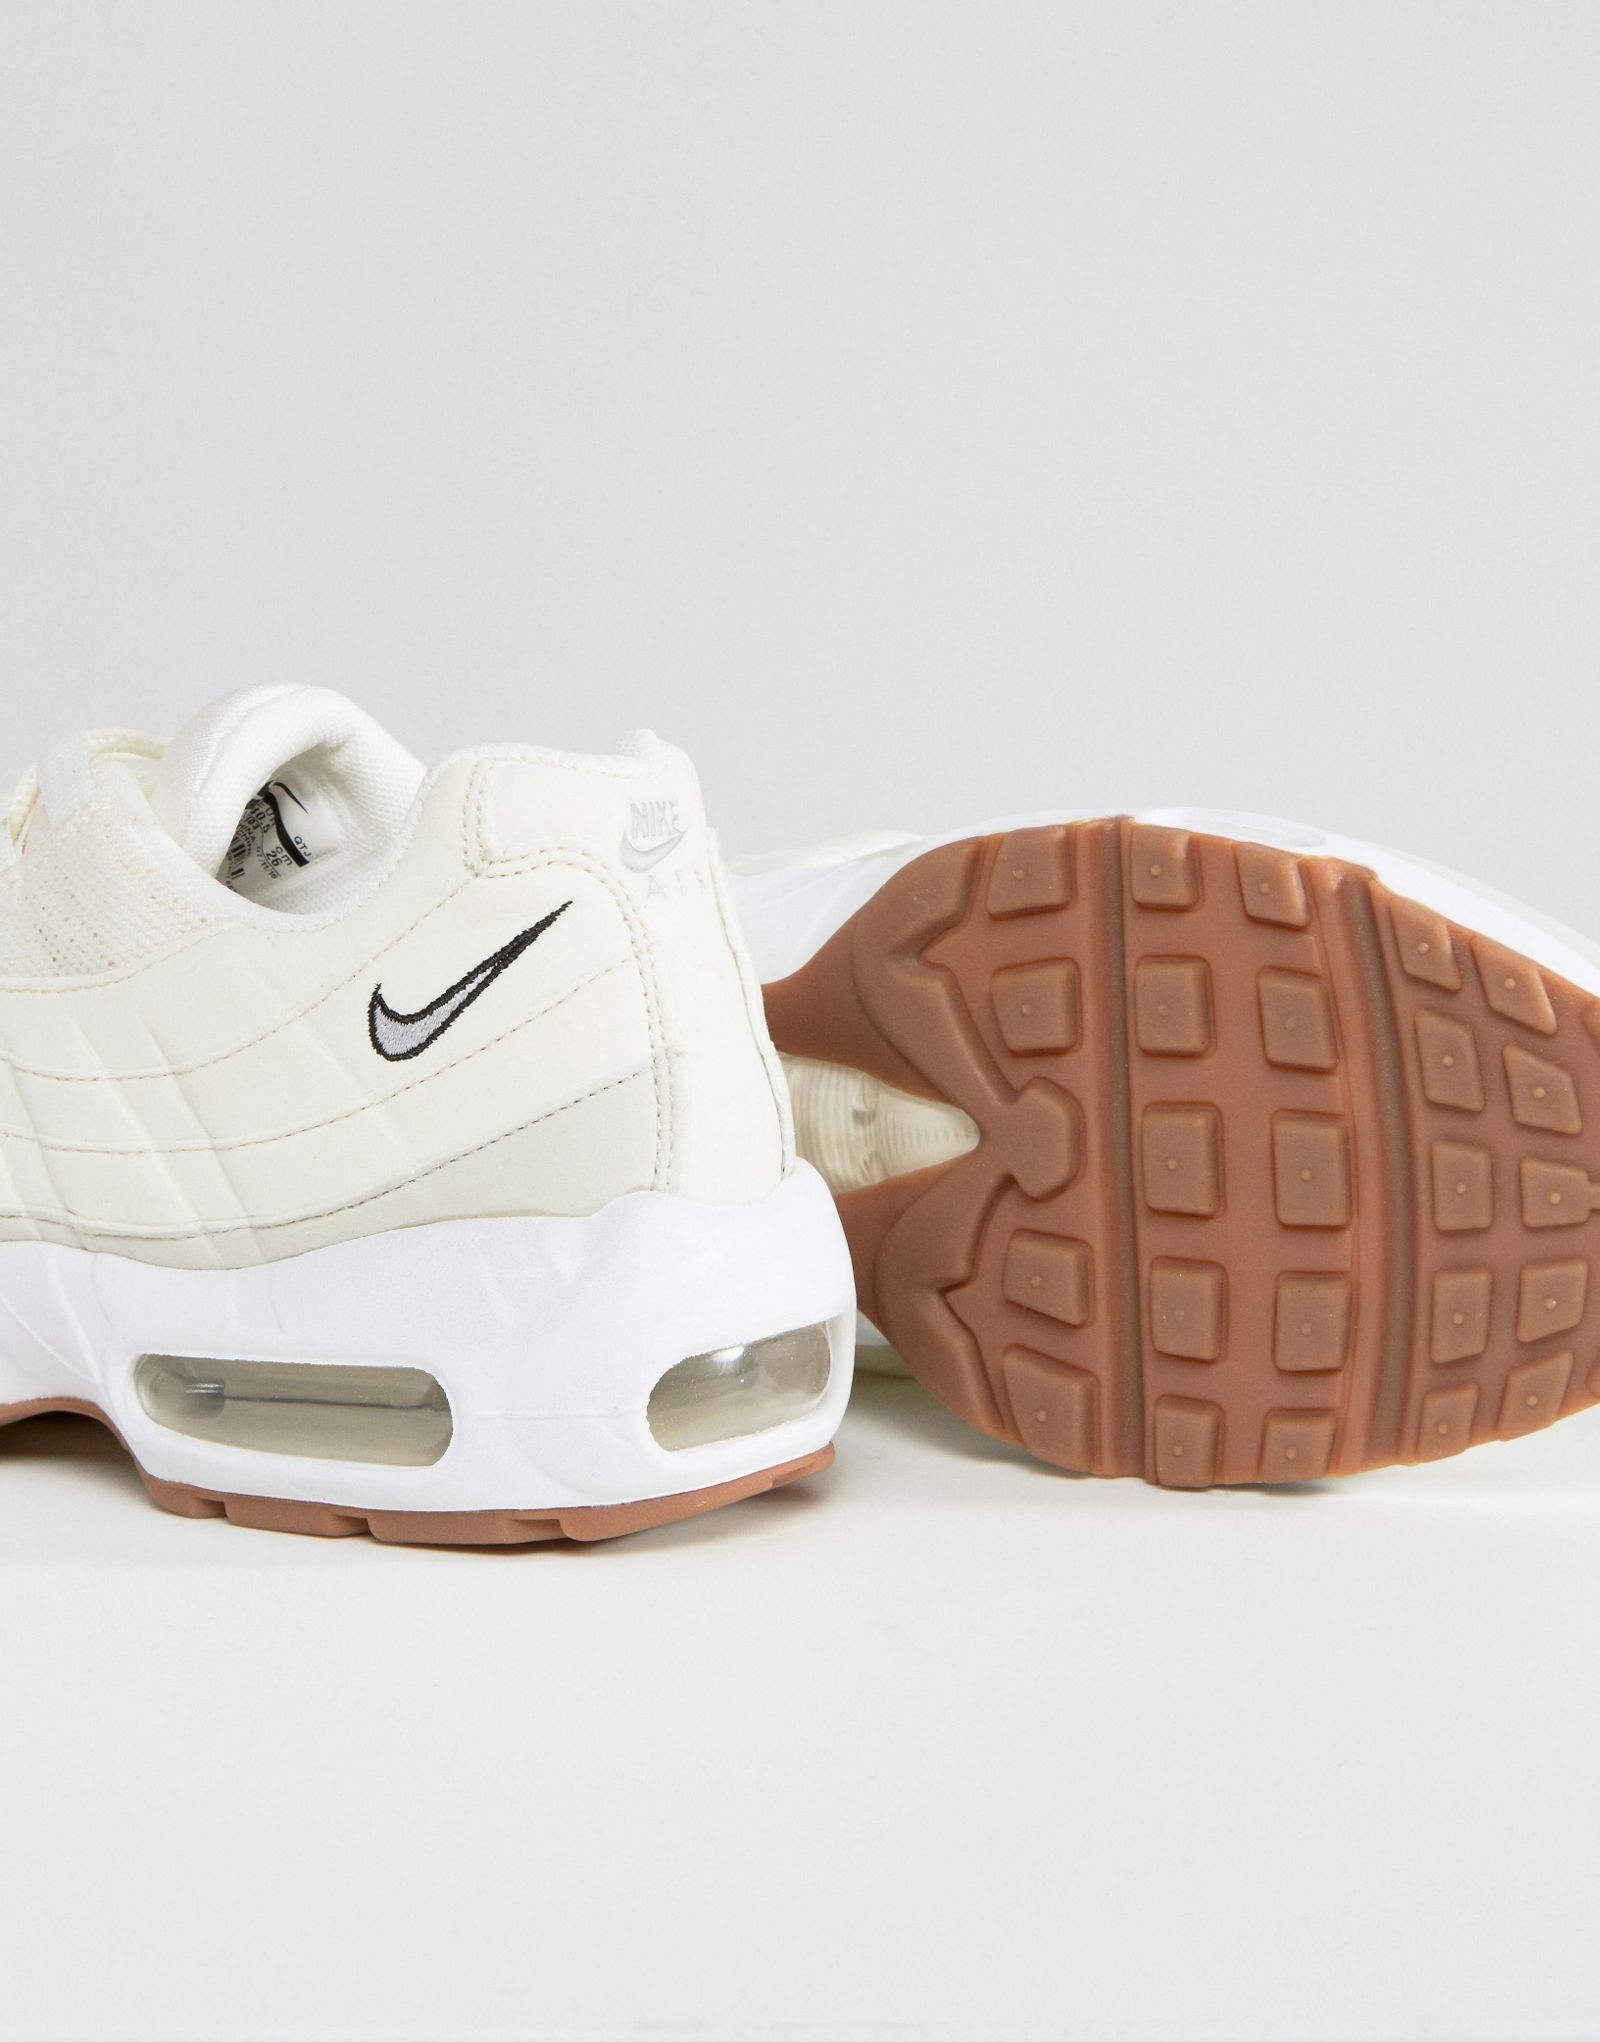 Nike Air Max 95 Sneakers In Off White With Gum Sole